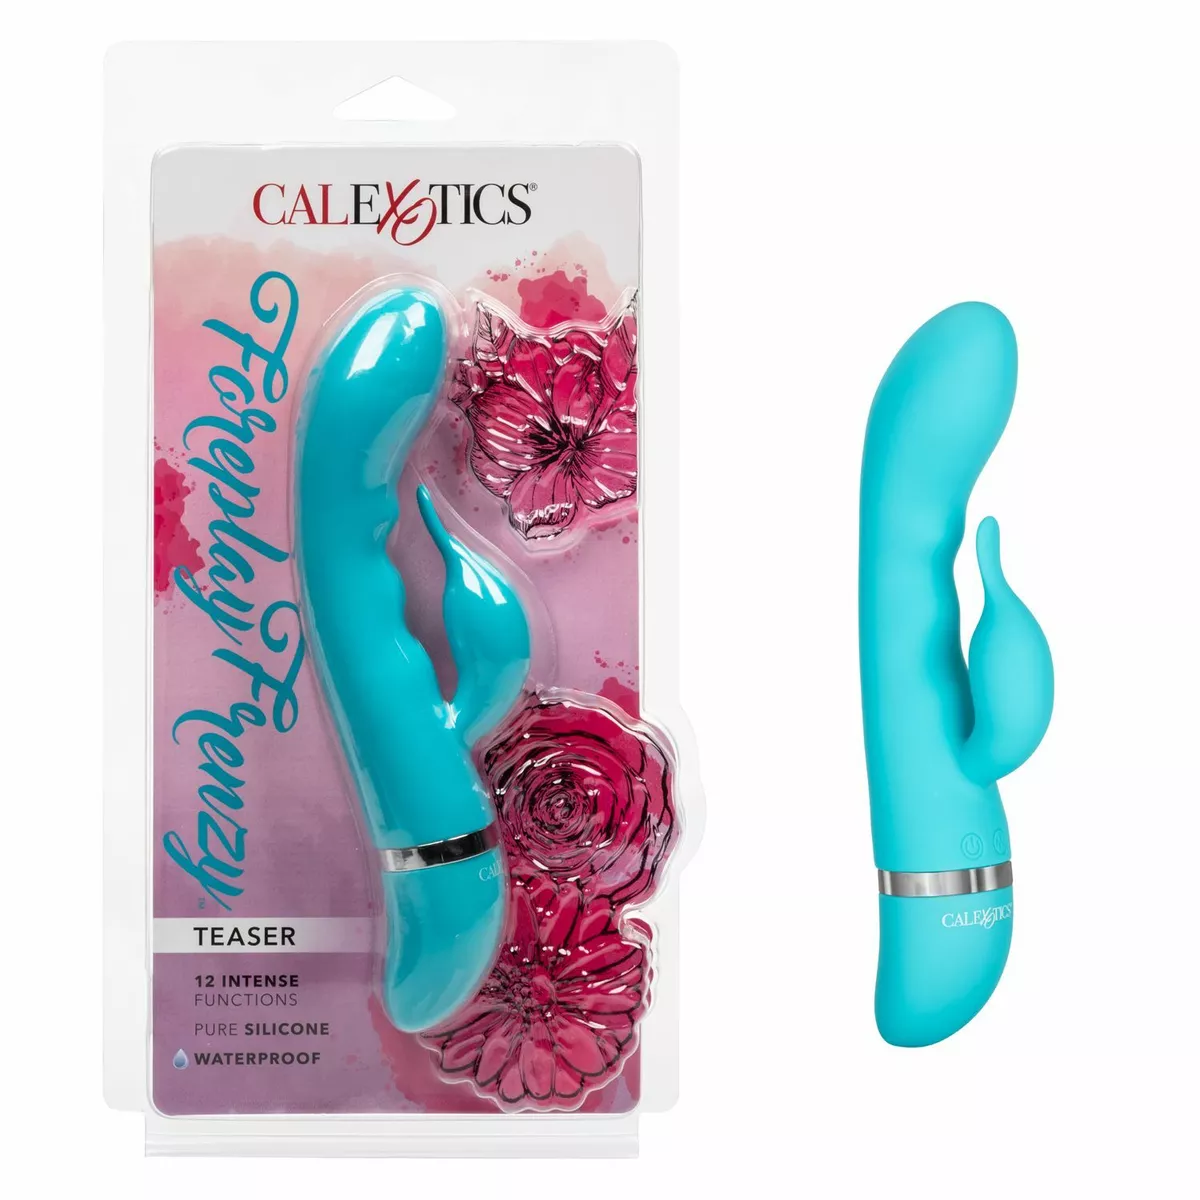 chuck knaack recommends blue dolphin sex toy pic